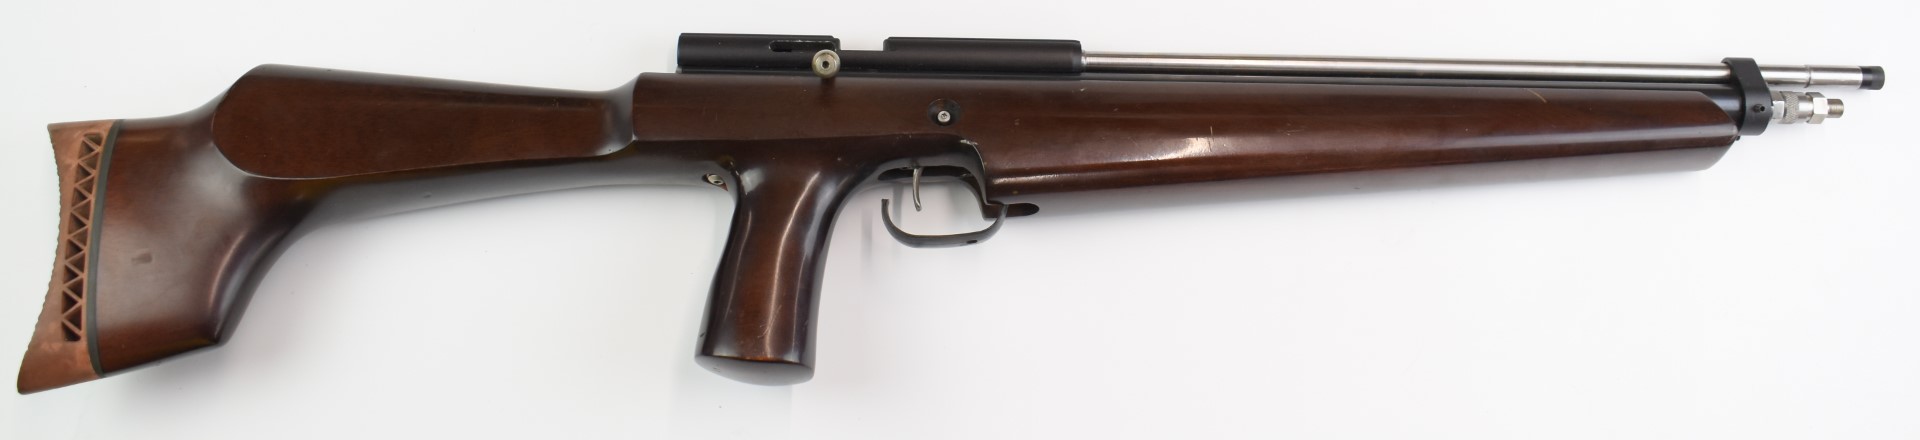 AGS-PCR1 .22 PCP bolt-action air rifle with pistol grip and adjustable trigger, serial number 00911. - Image 2 of 9